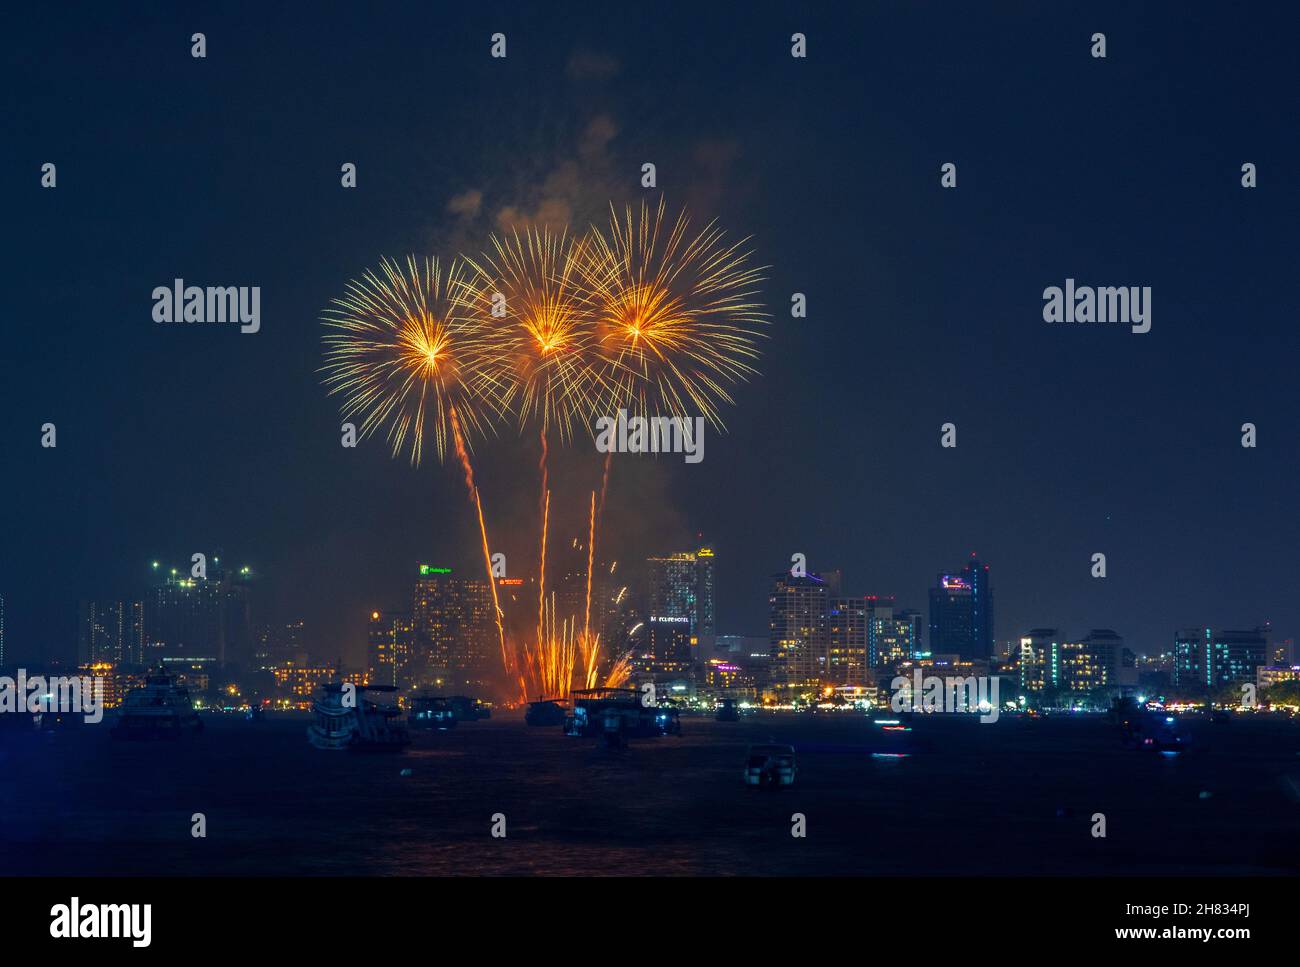 fantastic and colorful fireworks display over the night sky of the city during a festival Stock Photo